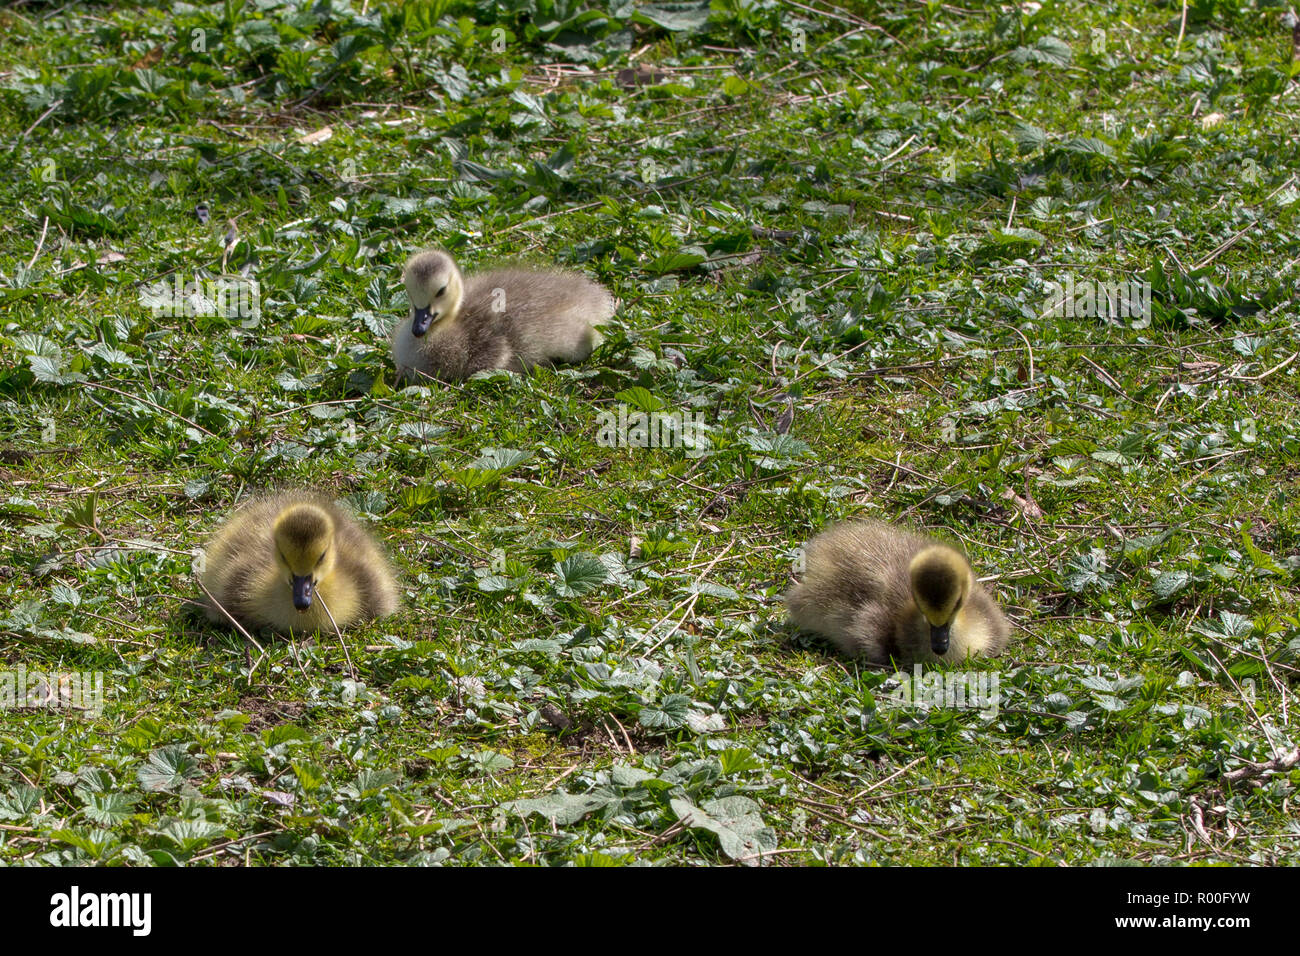 A trio of young, fluffy goslings sit on the uncultivated ground around Vancouver's Lost Lagoon. Stock Photo